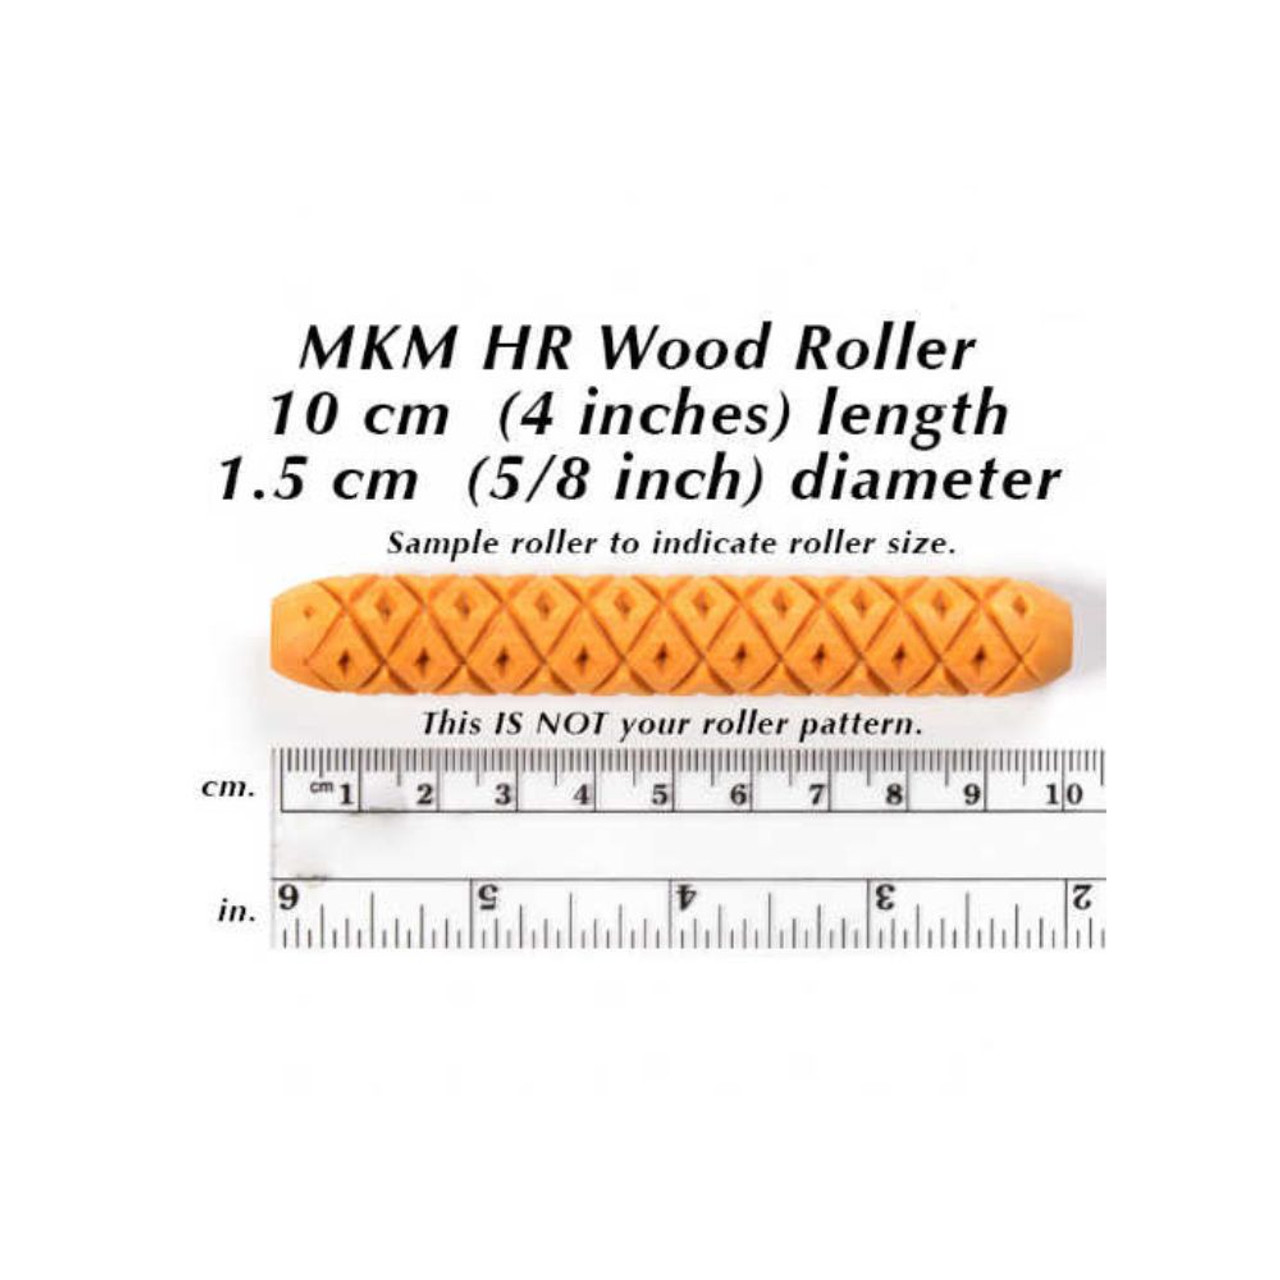 Size of roller